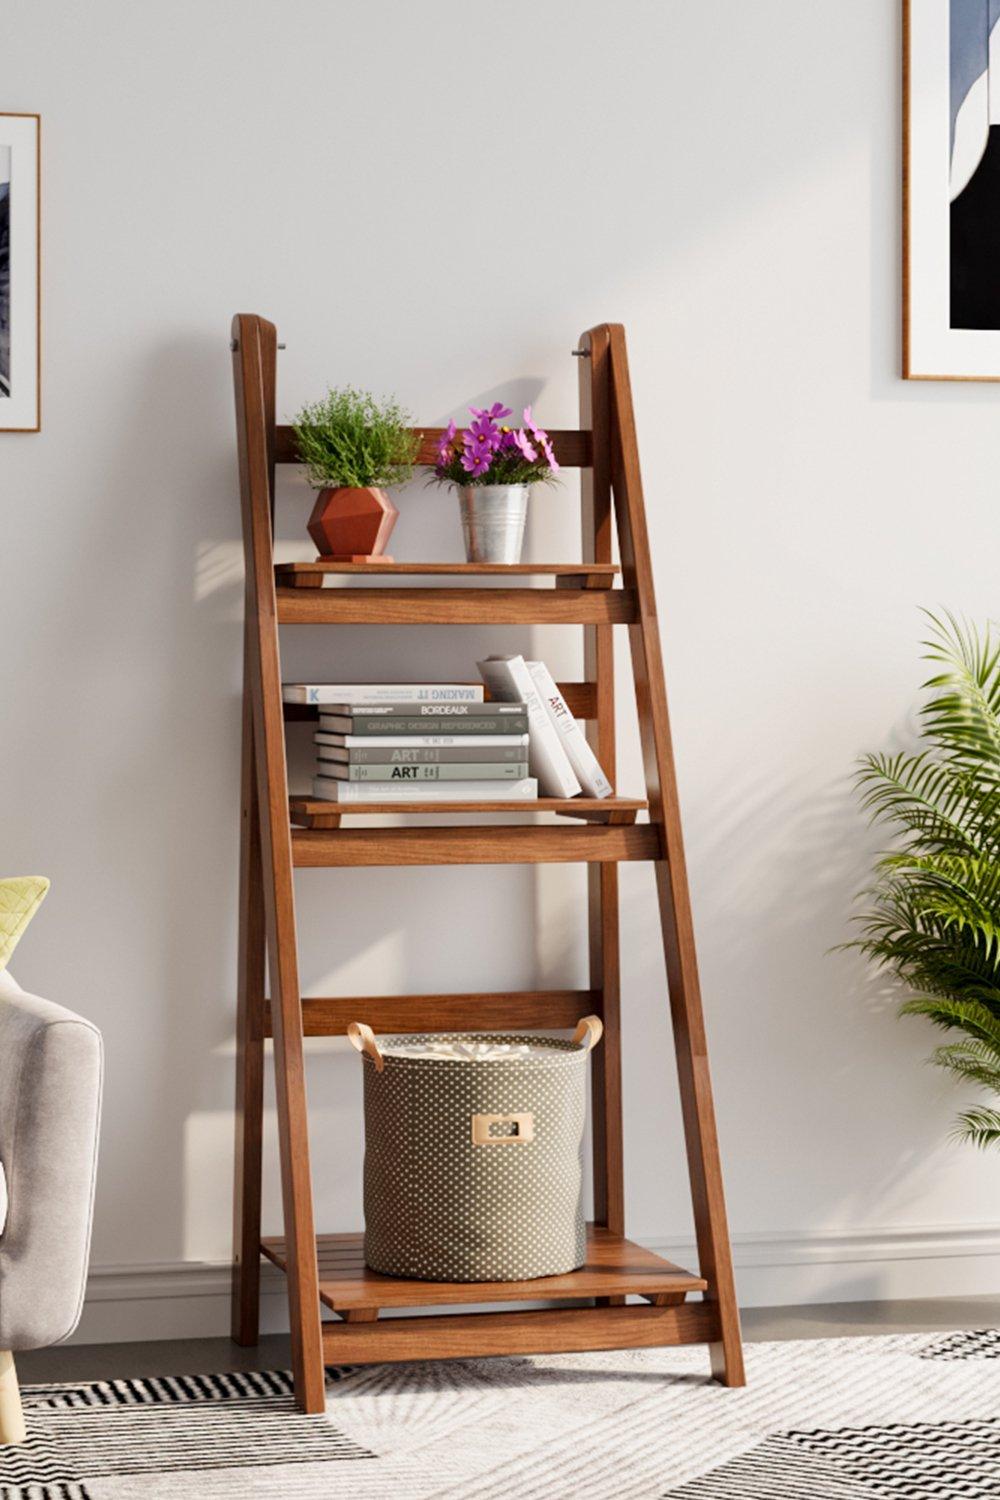 3 Layer Rustic Wooden Foldable Ladder Shelf for Plants Brown